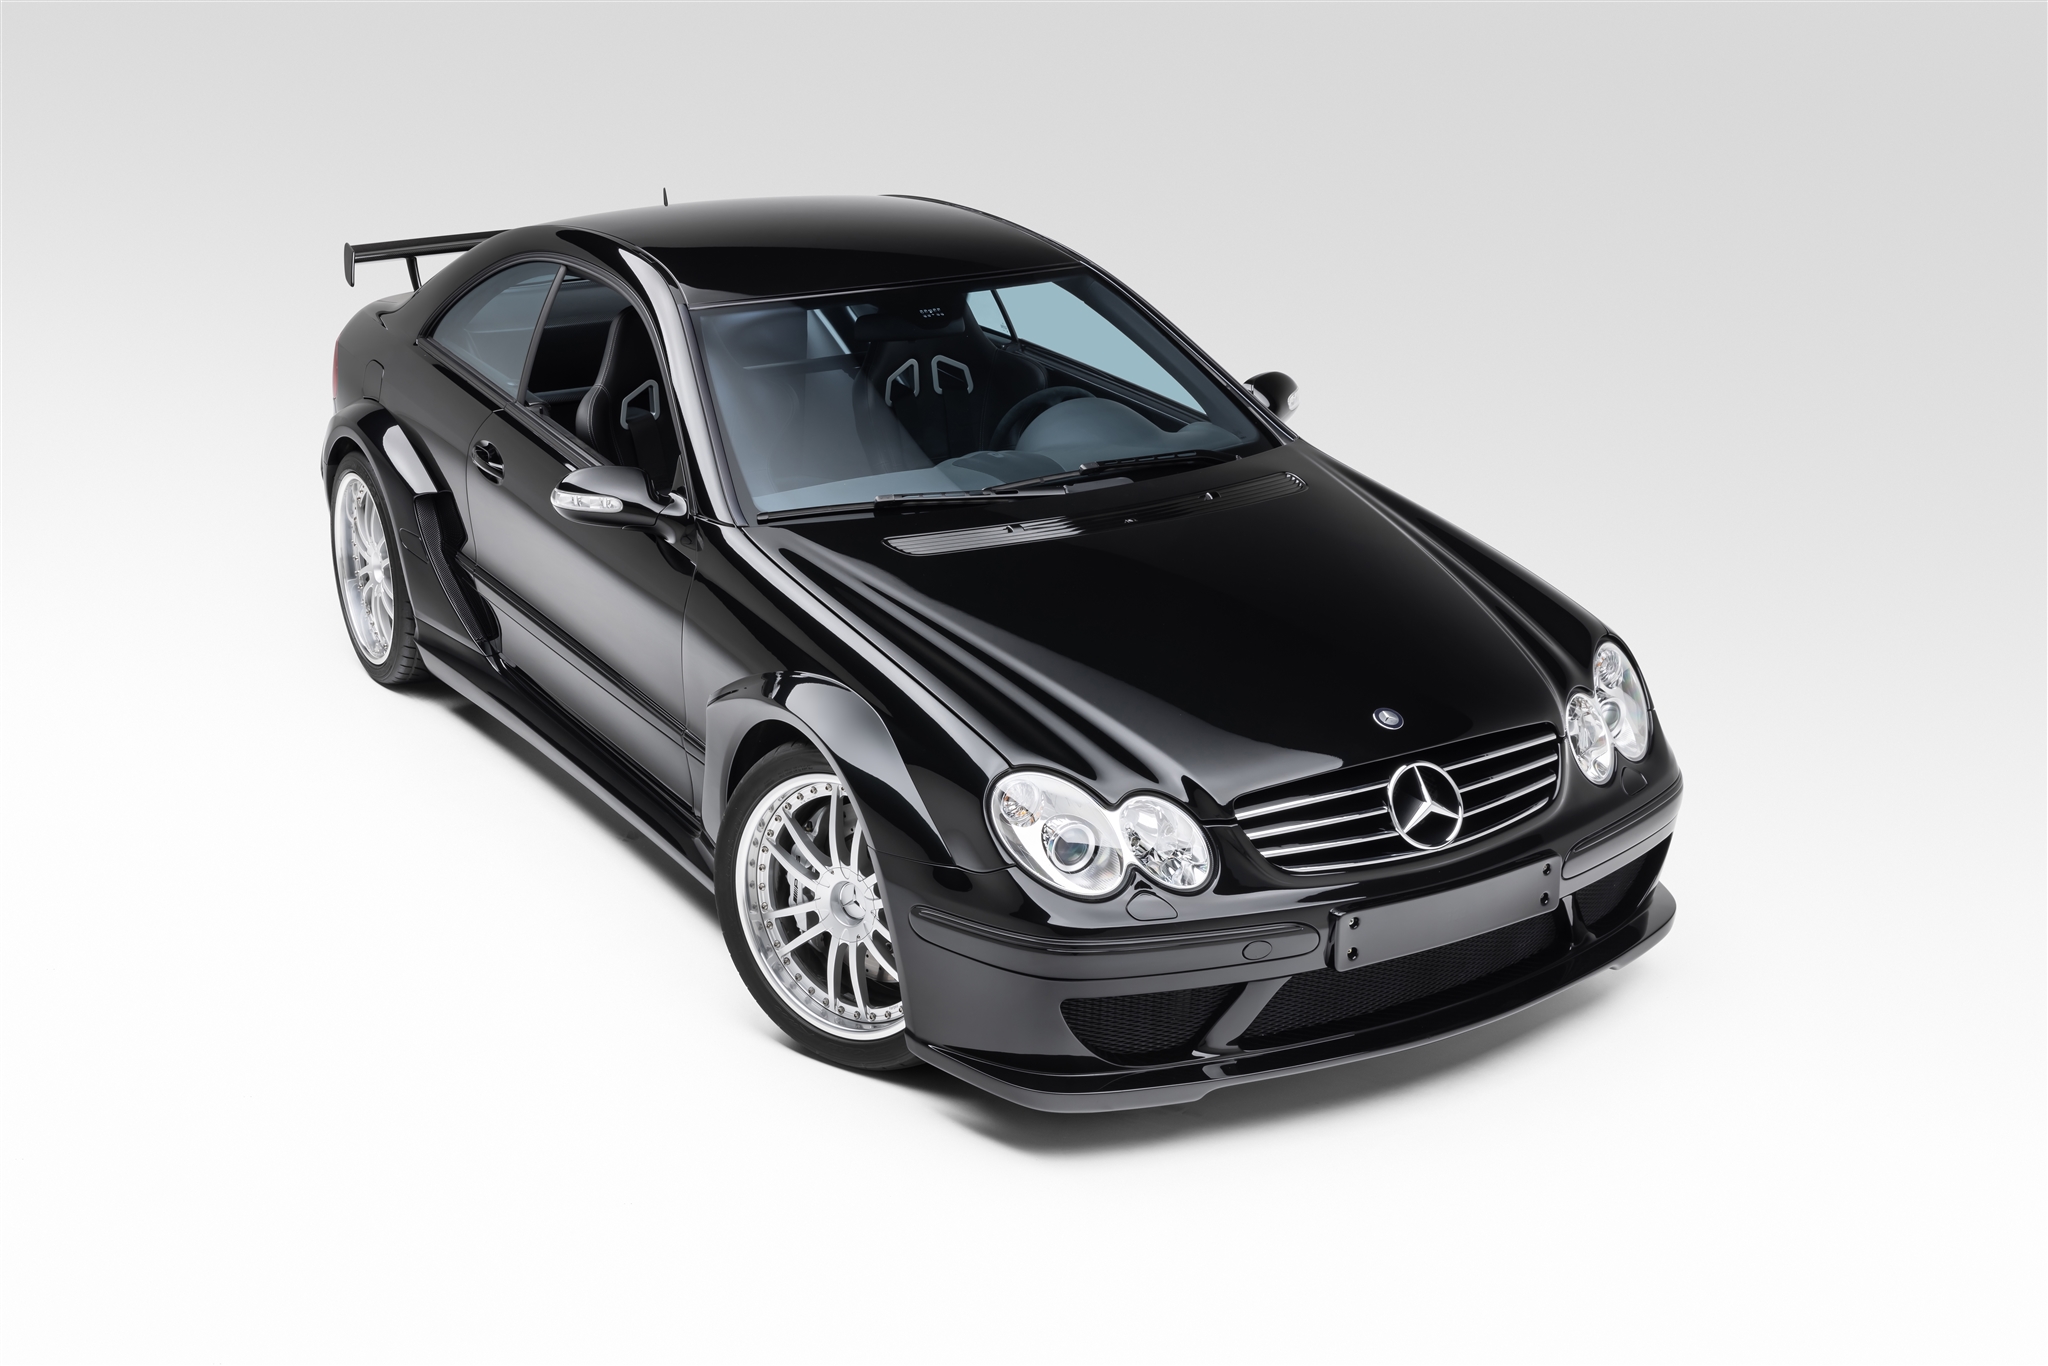 Used 2,800-Mile 2005 Mercedes-Benz CLK DTM AMG Coupe Review